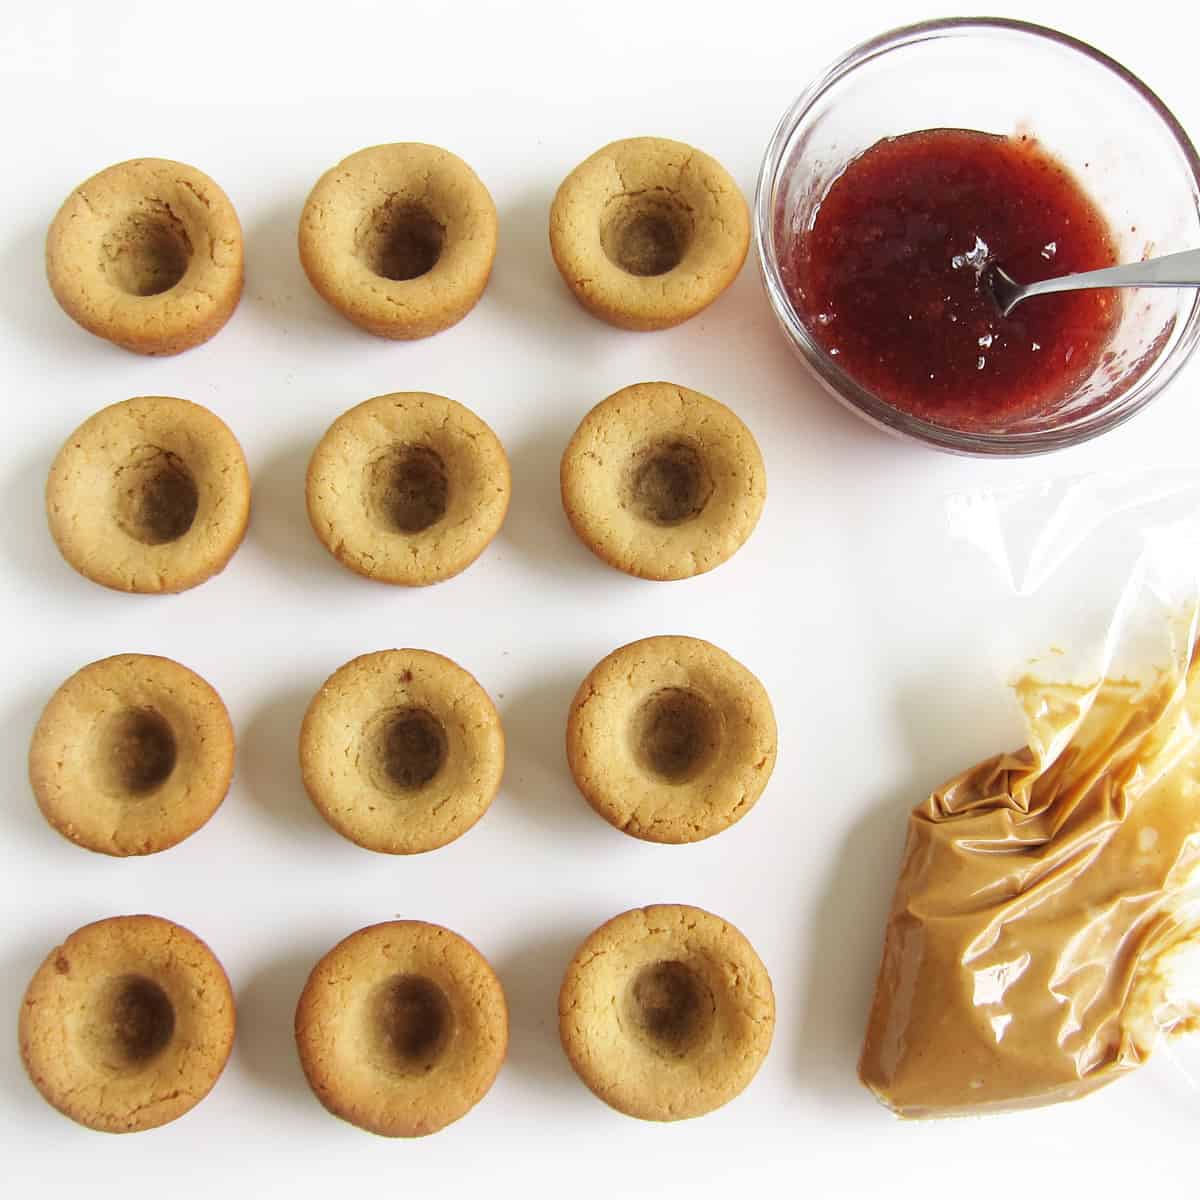 peanut butter cookie cups with indentations, with strawberry jam and a bag of peanut butter